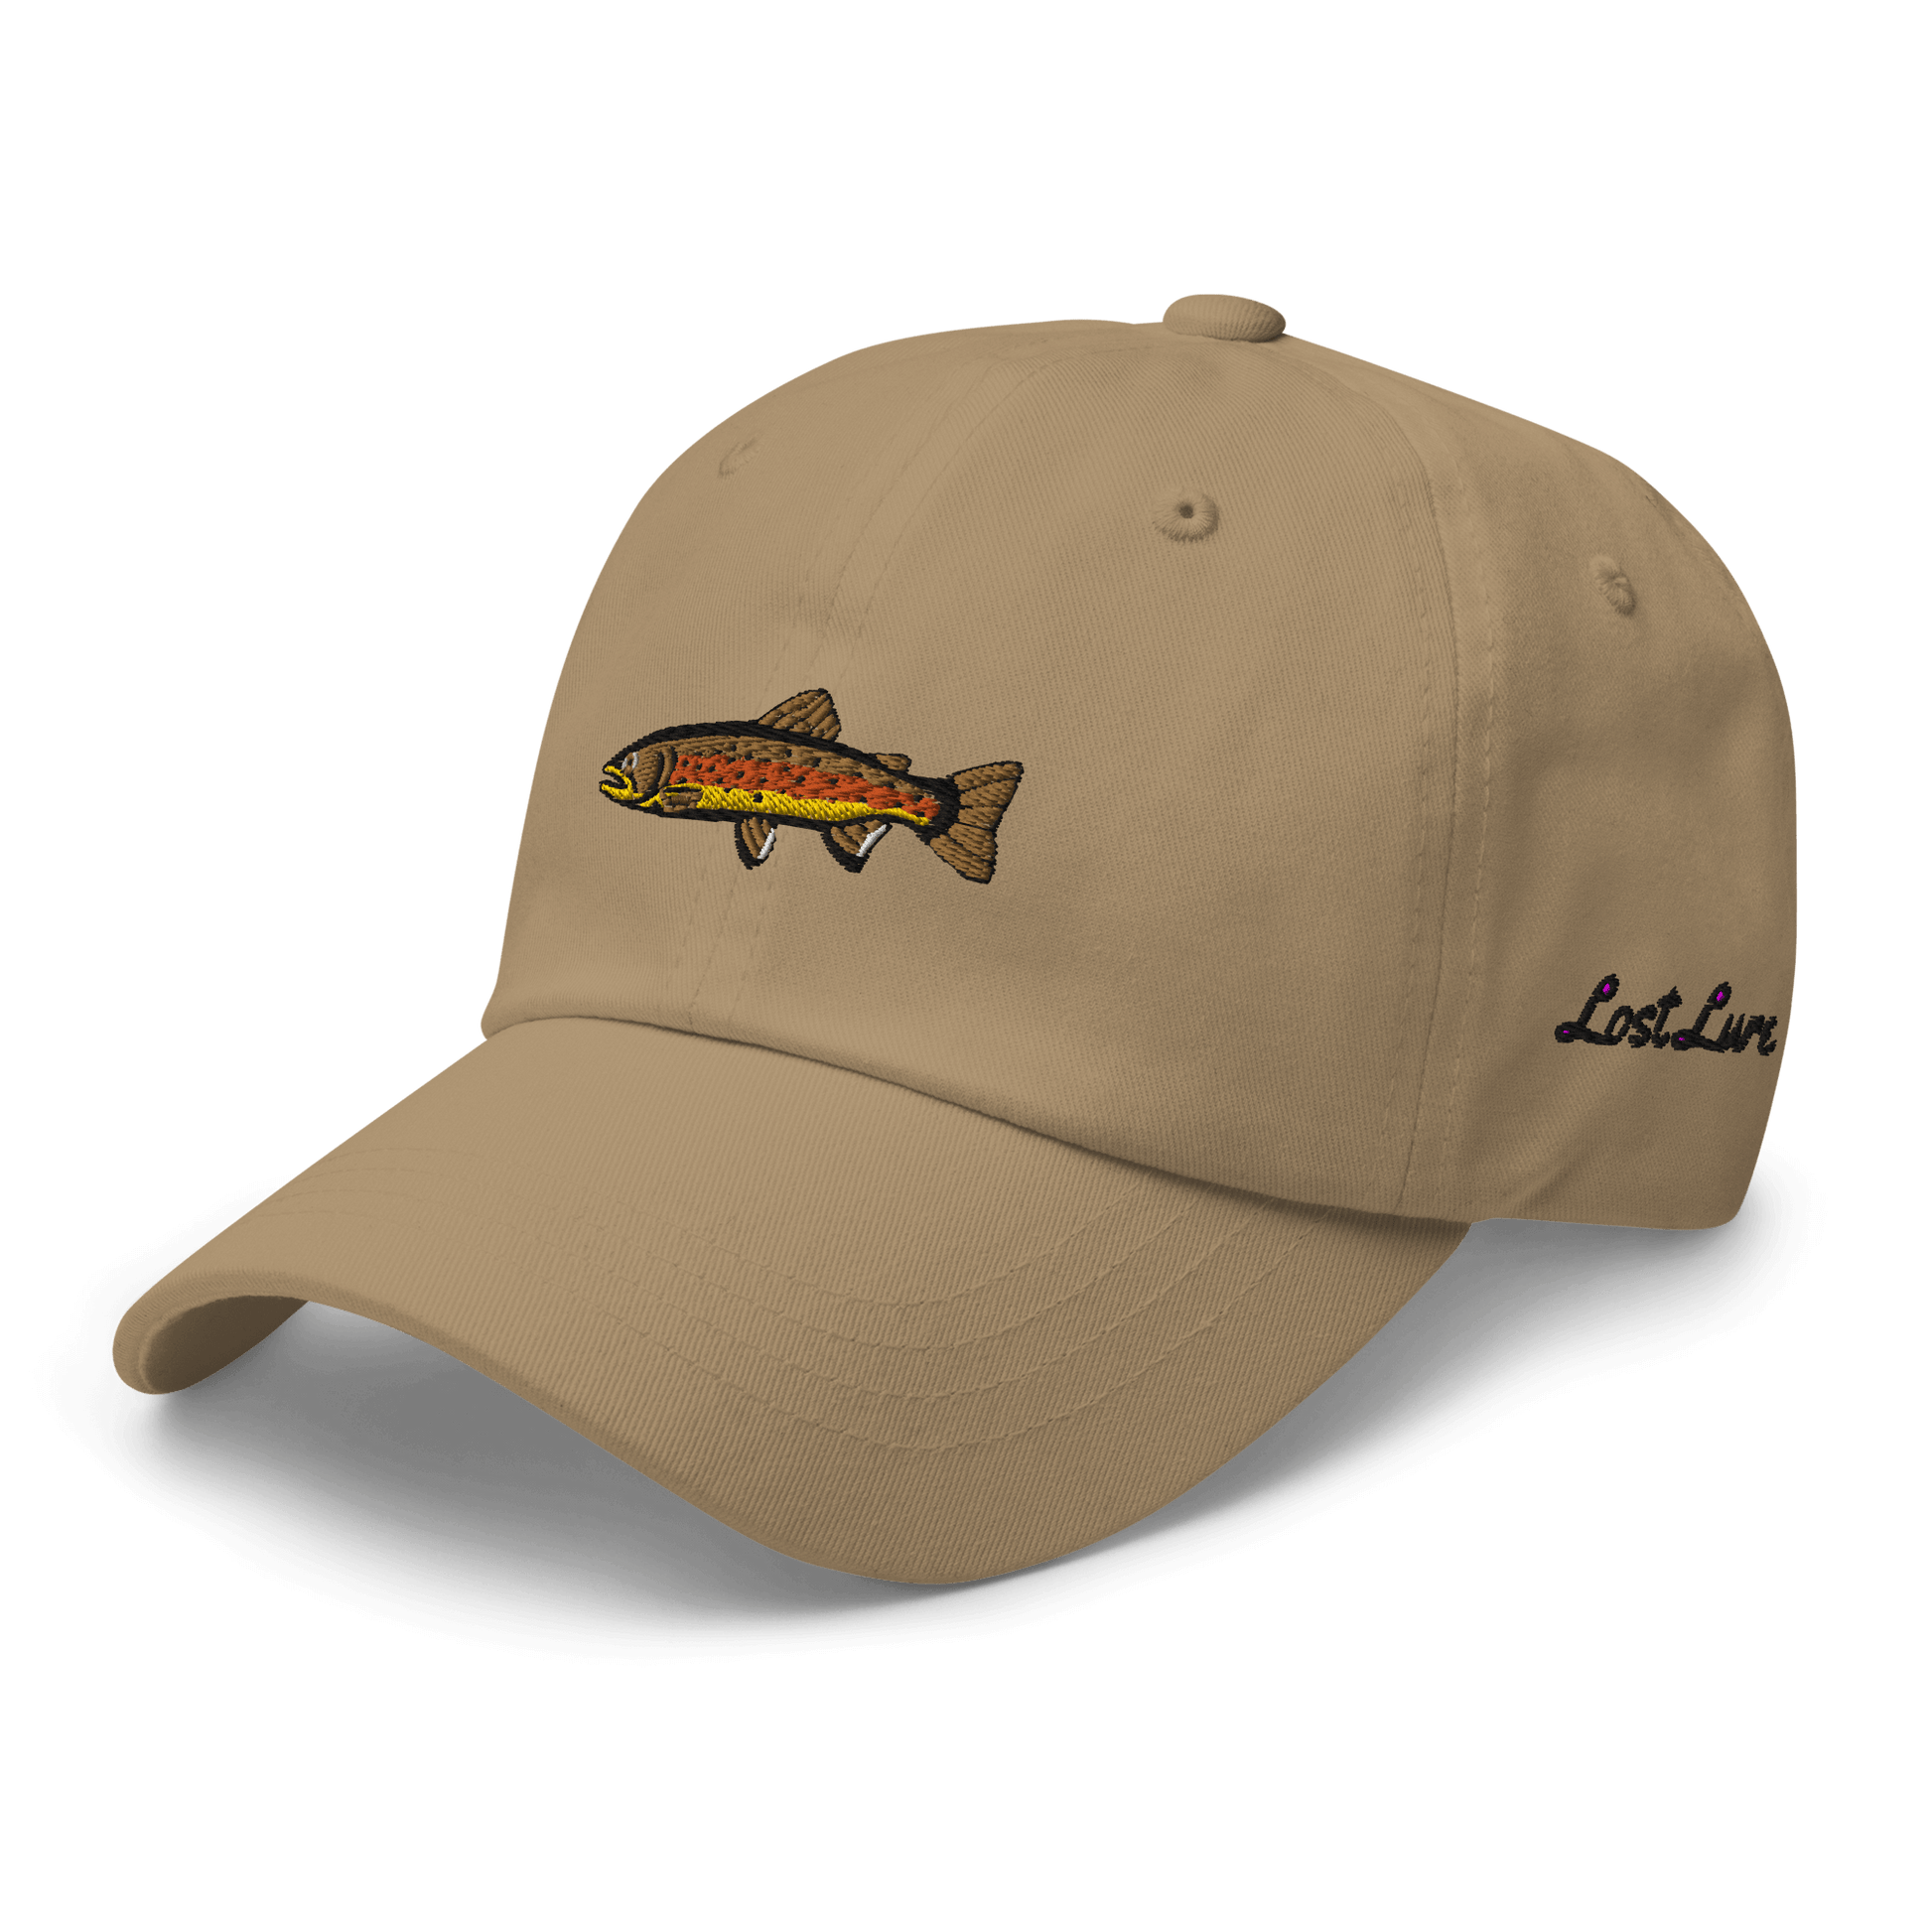 Brown Trout Fishing Hat Light Blue